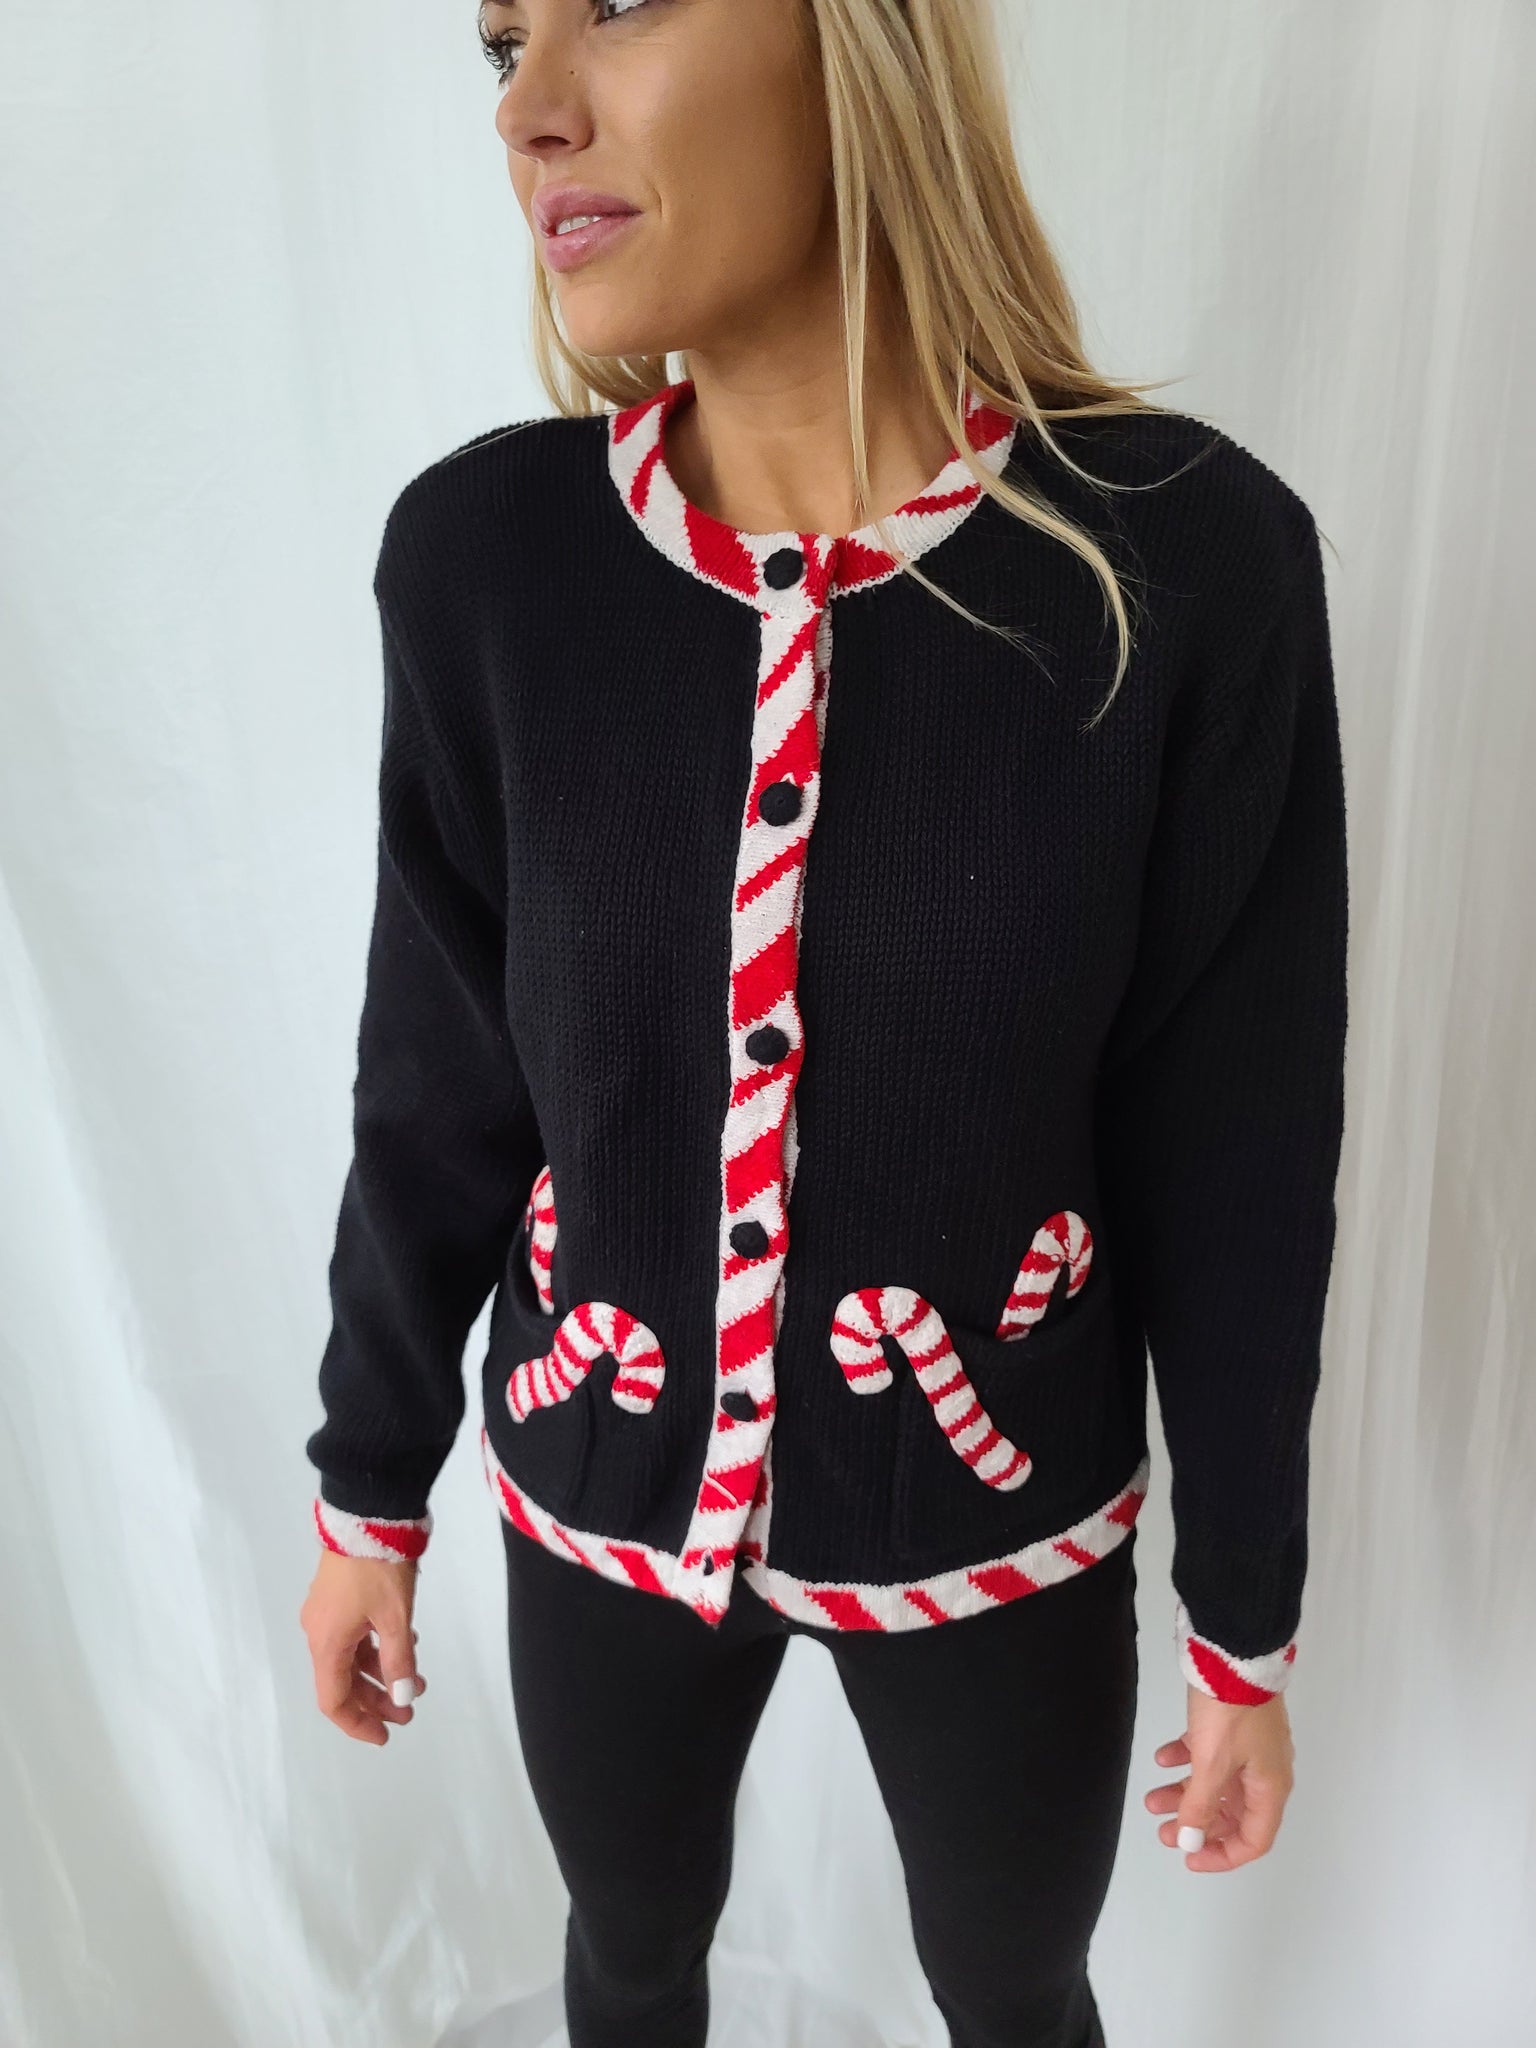 Candy Cane Vintage Christmas Sweater with Pockets